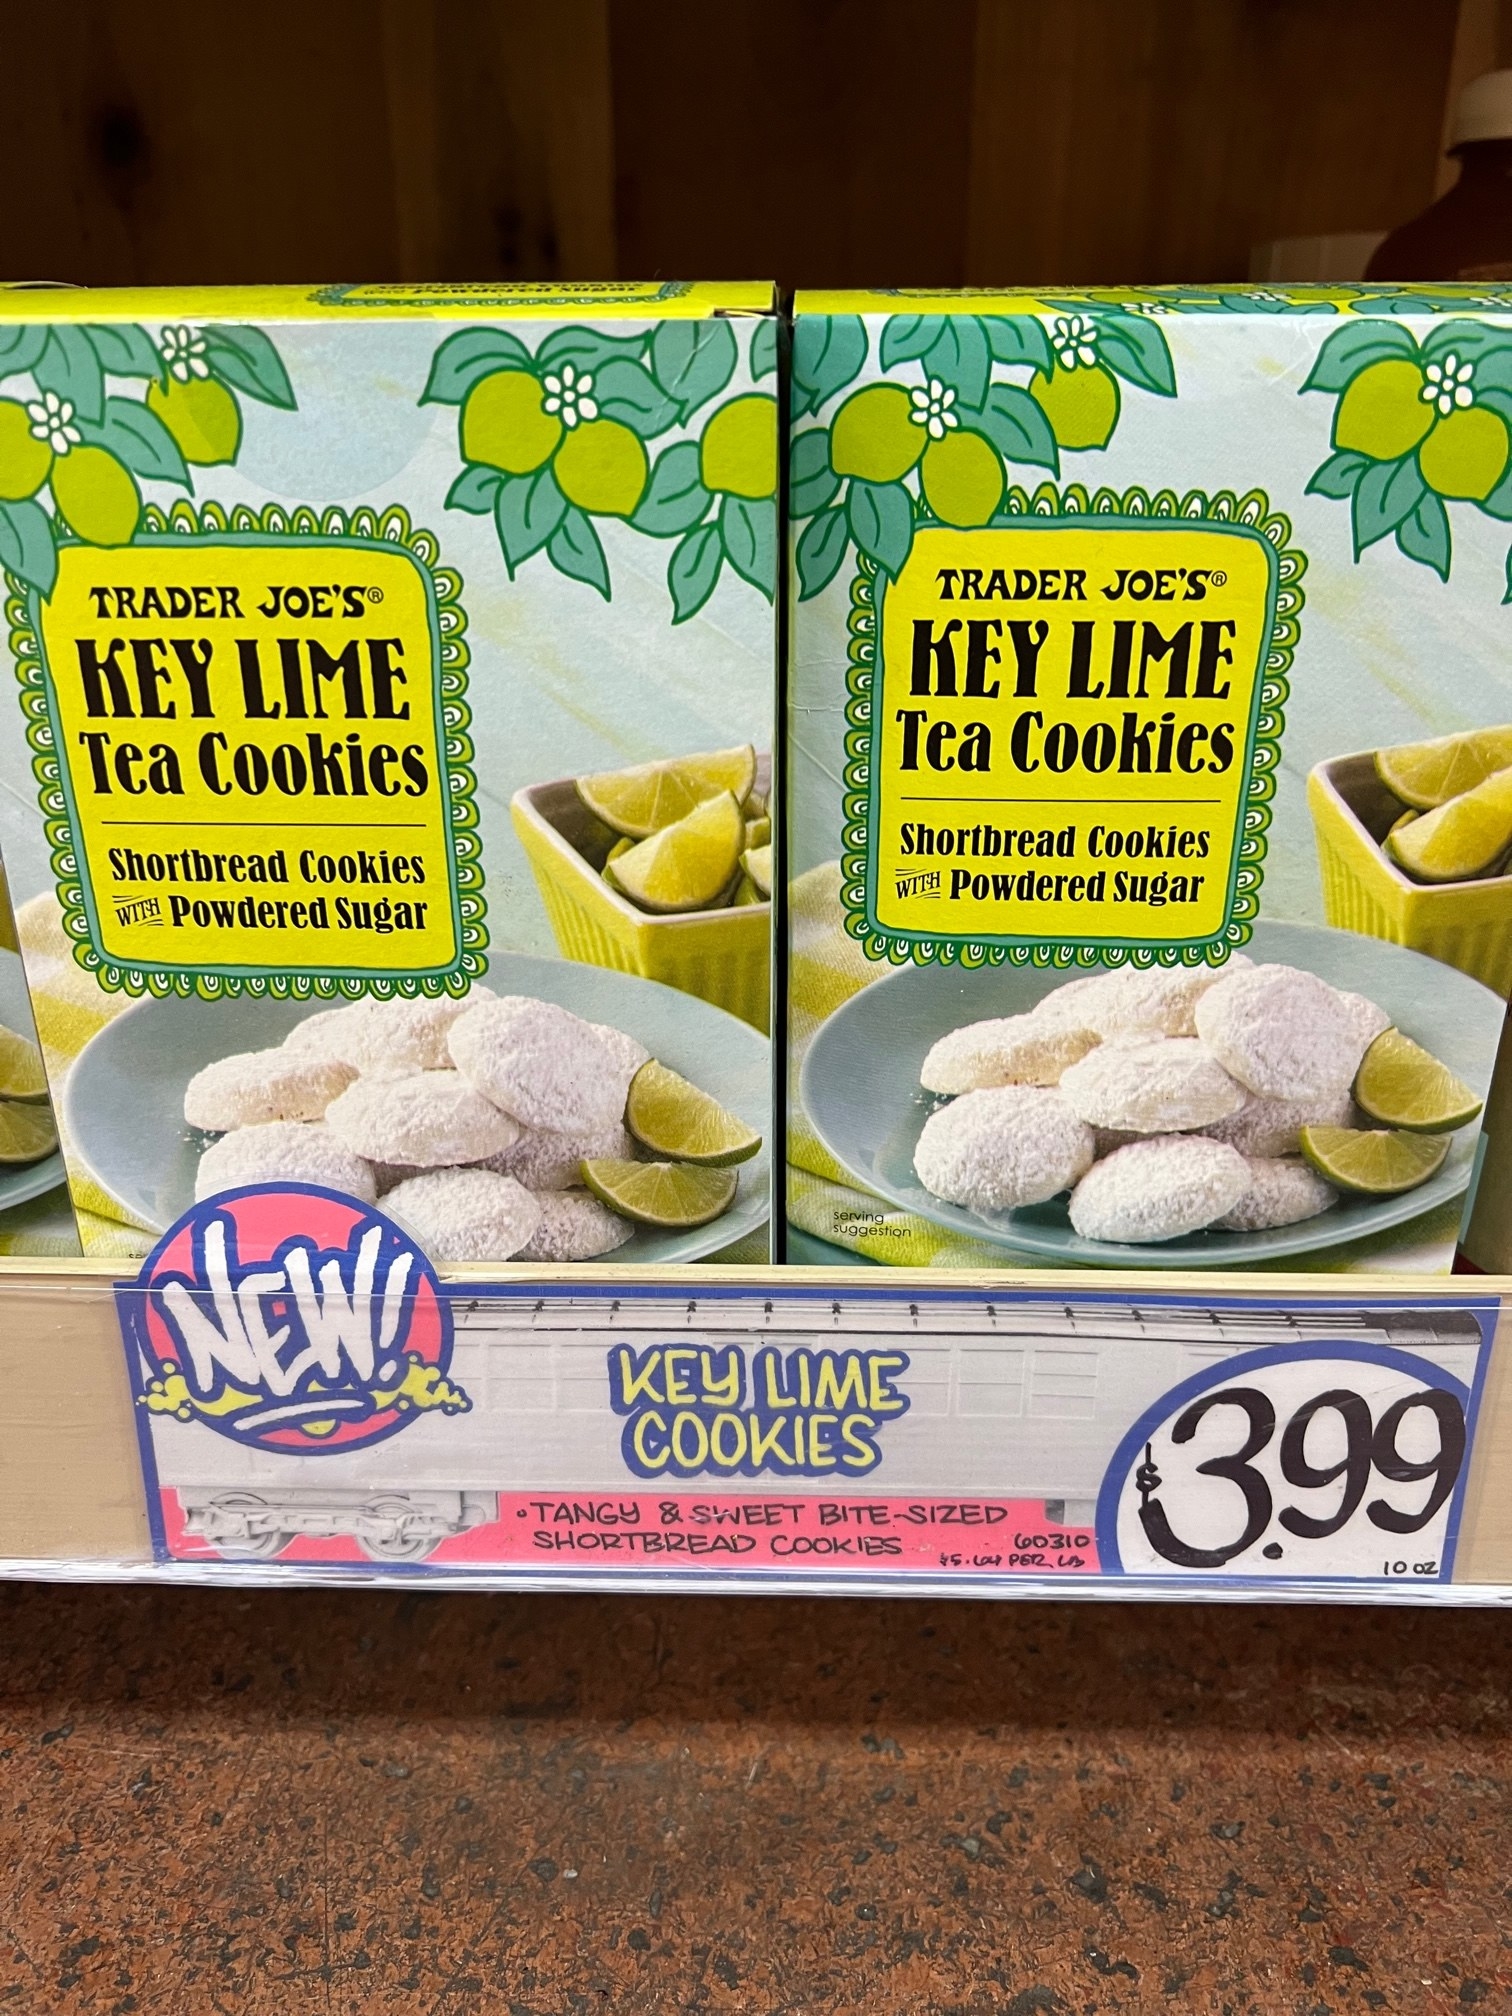 Boxes of key lime cookies